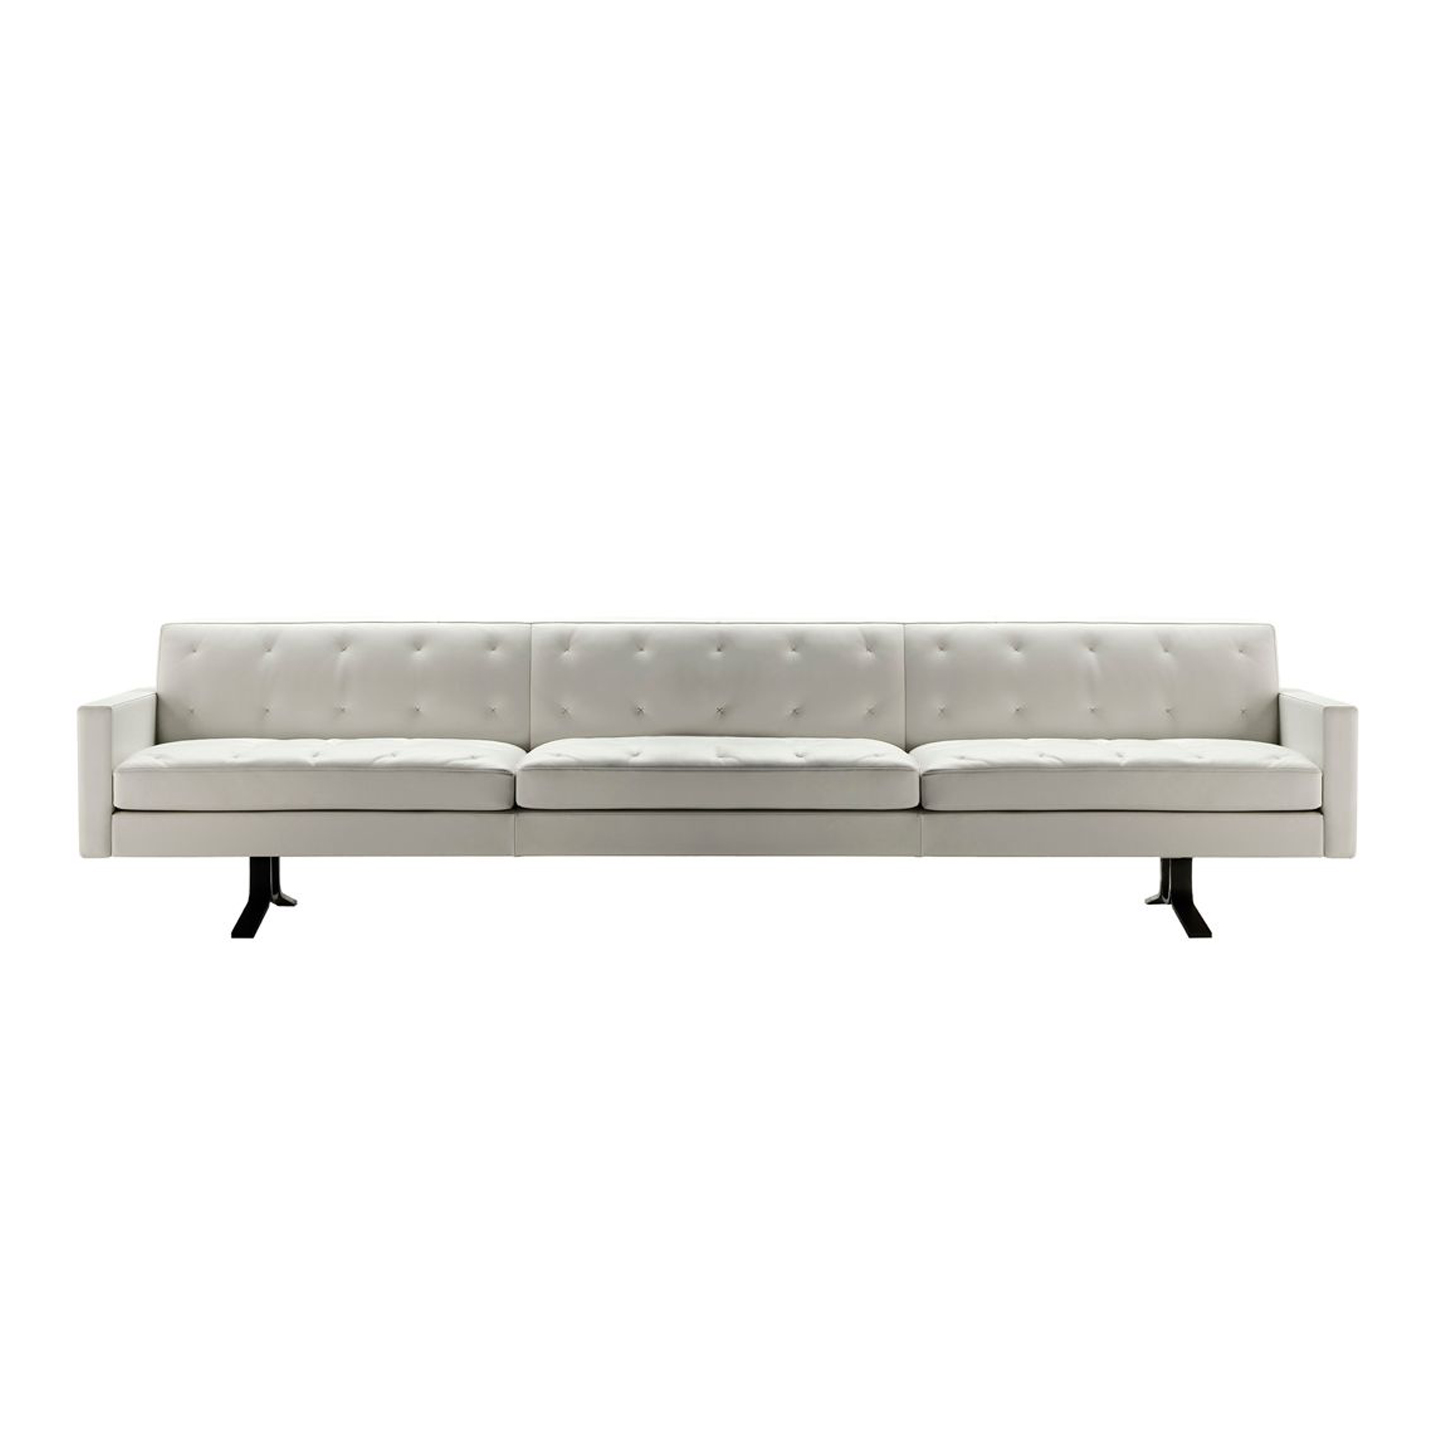 Haworth Kennedee three seater lounge sofa in white leather with metal legs